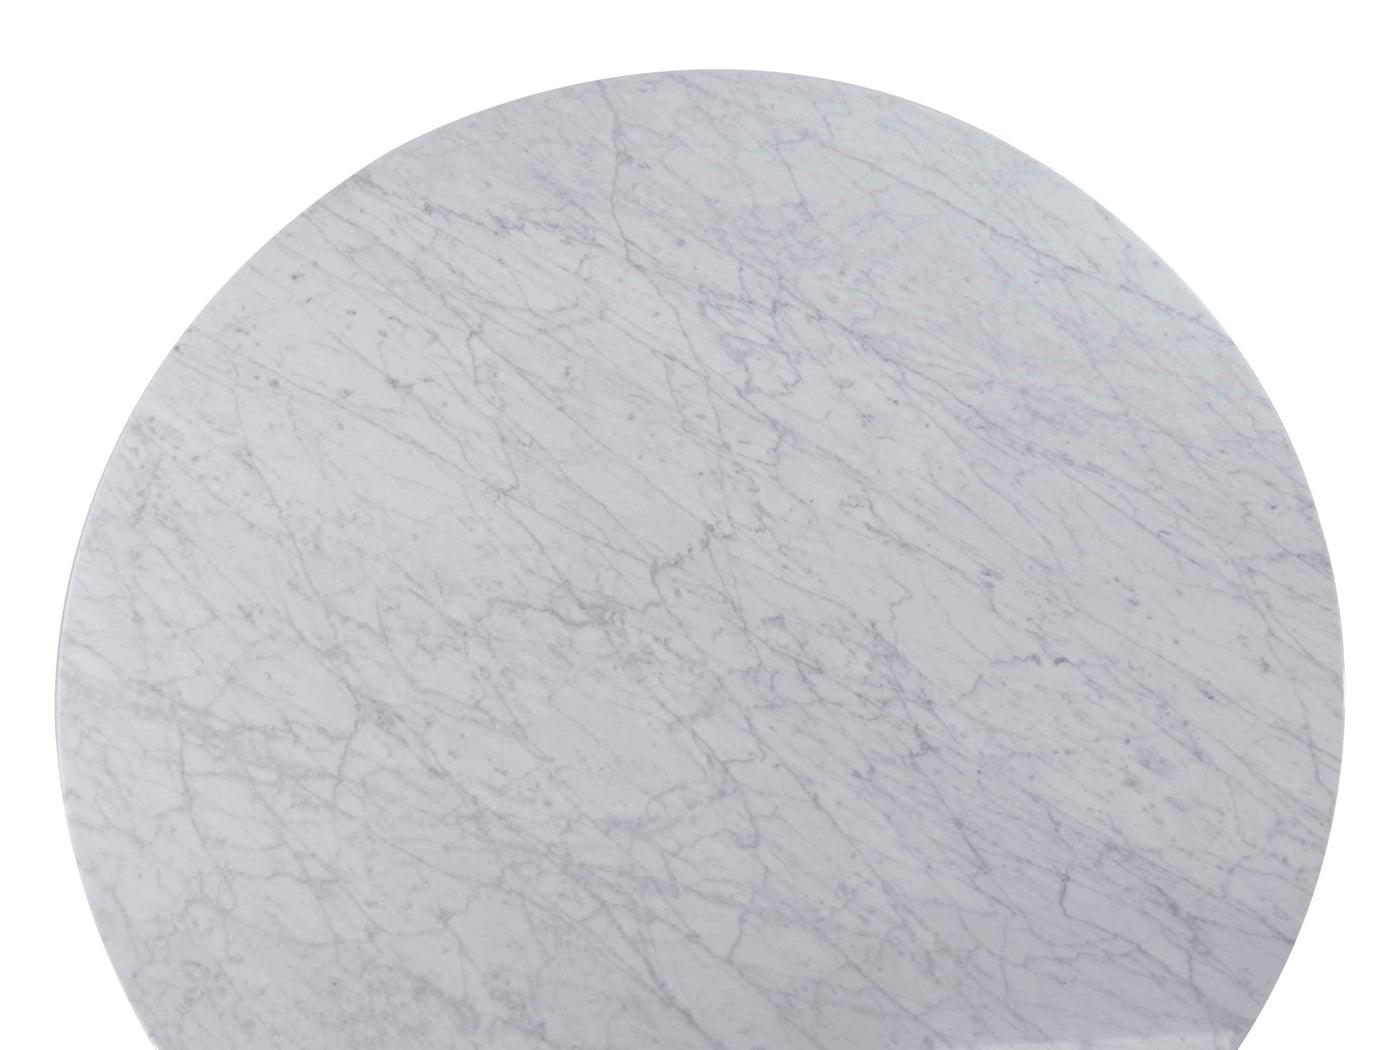 1.15m Marble Round Dining Table - Natural